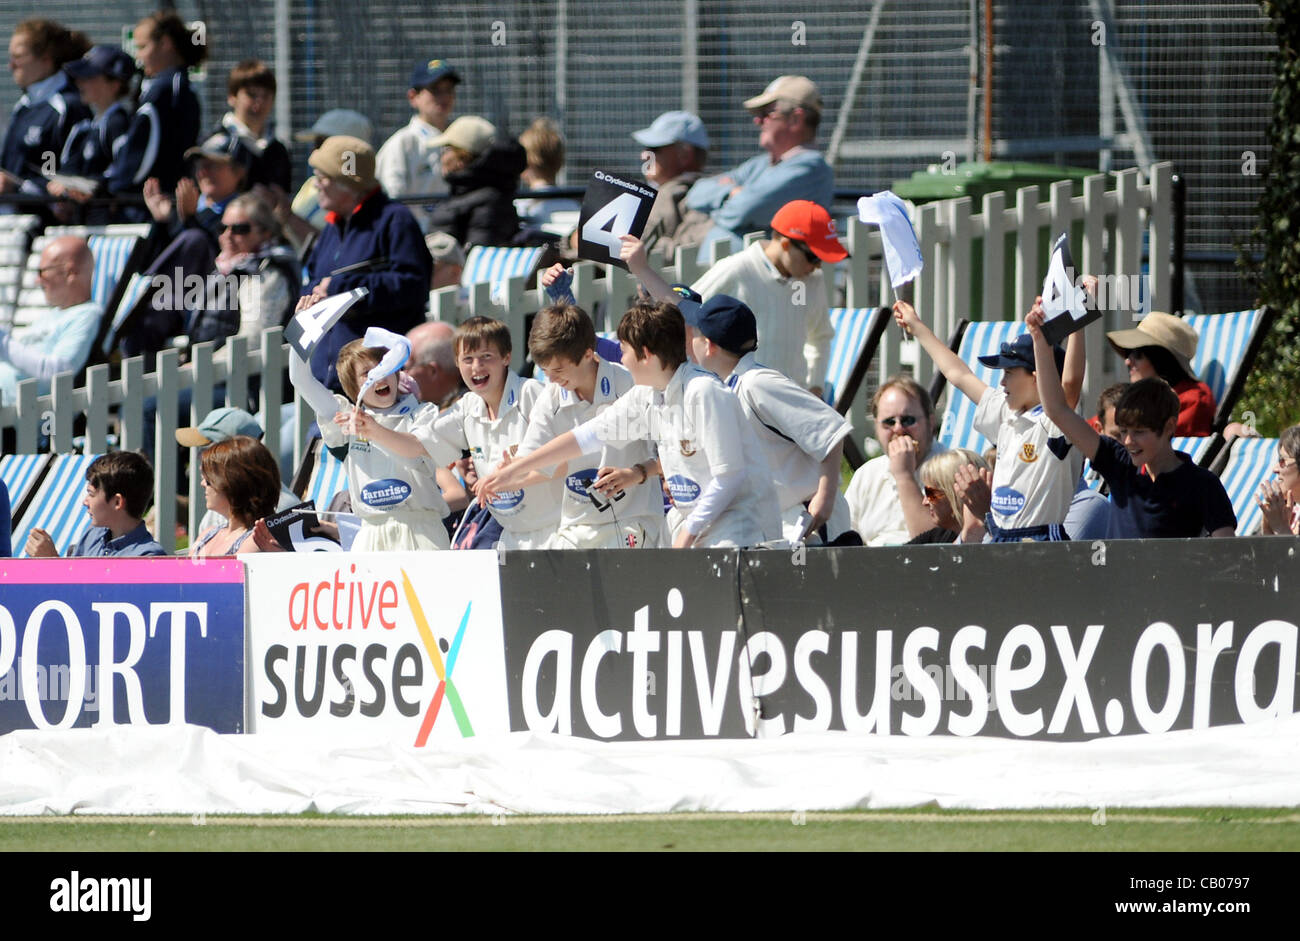 Sussex Sharks young fans celebrate another boundary against Unicorns in their Clydesdale Bank 40 League cricket match at the Probiz County Ground in Hove today UK Photograph taken by Simon Dack 13 May 2012 Stock Photo